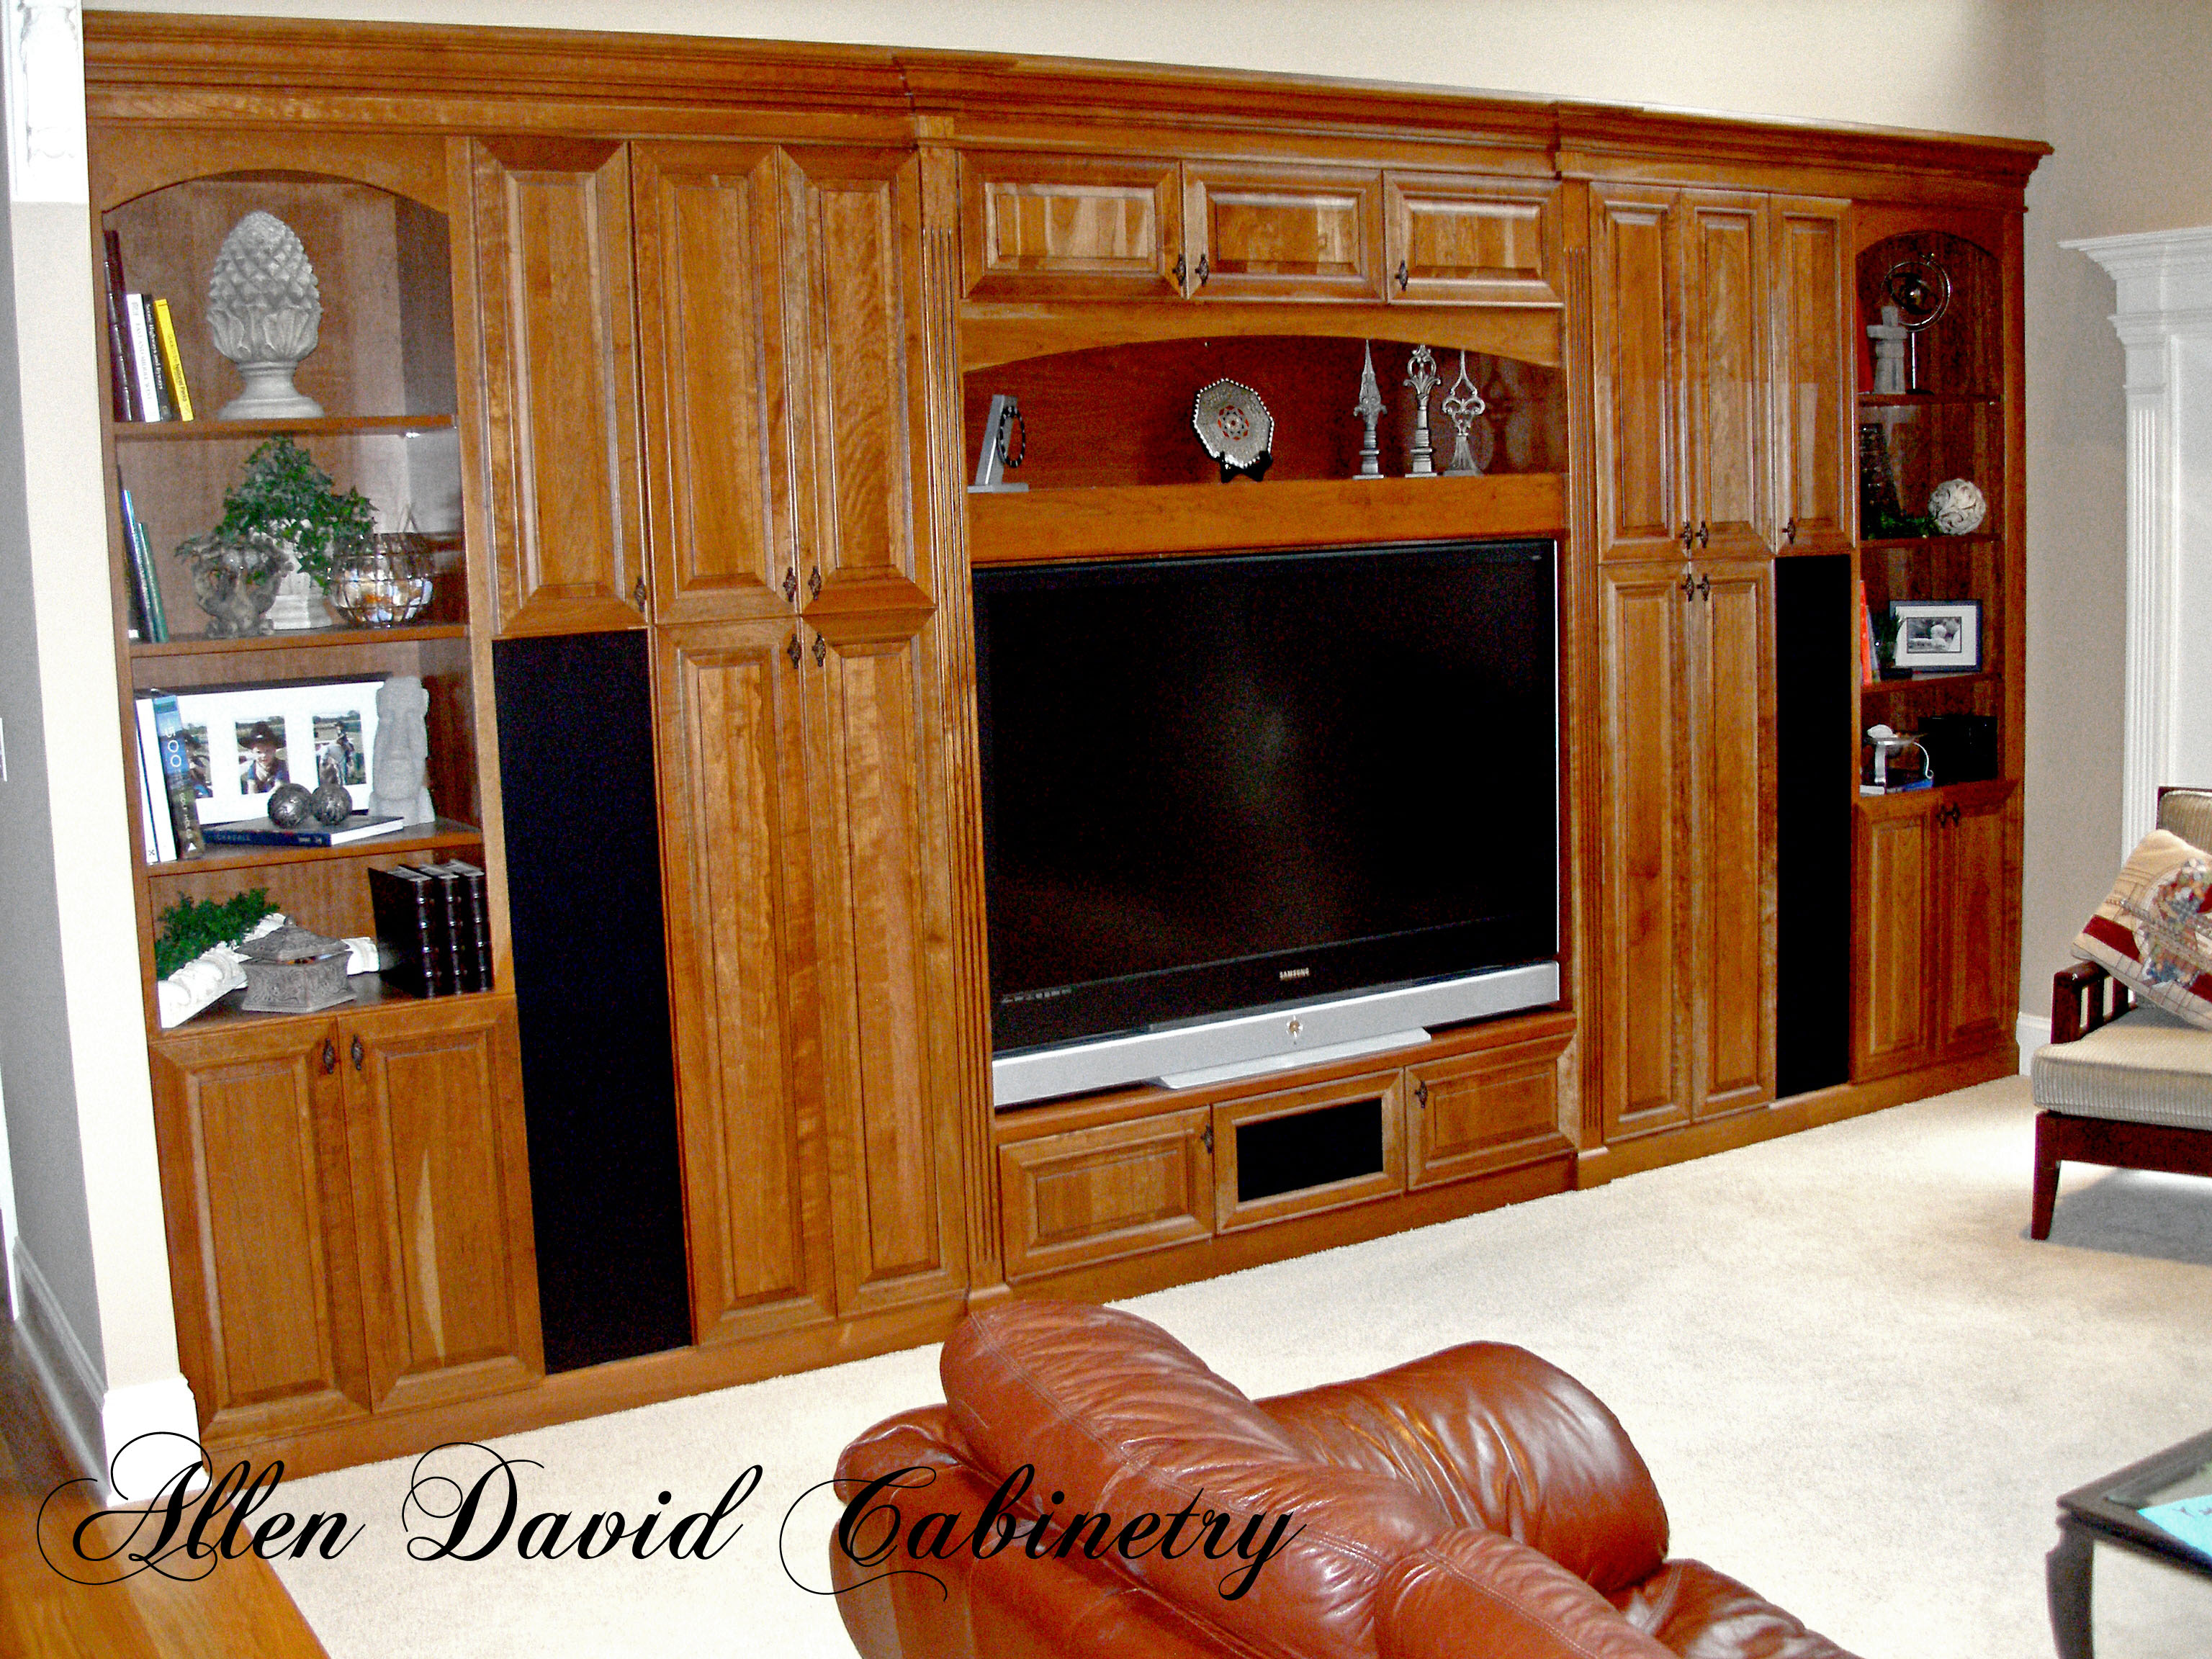 Kitchen cabinets by Allen David Cabinetry-(980) 722-9186